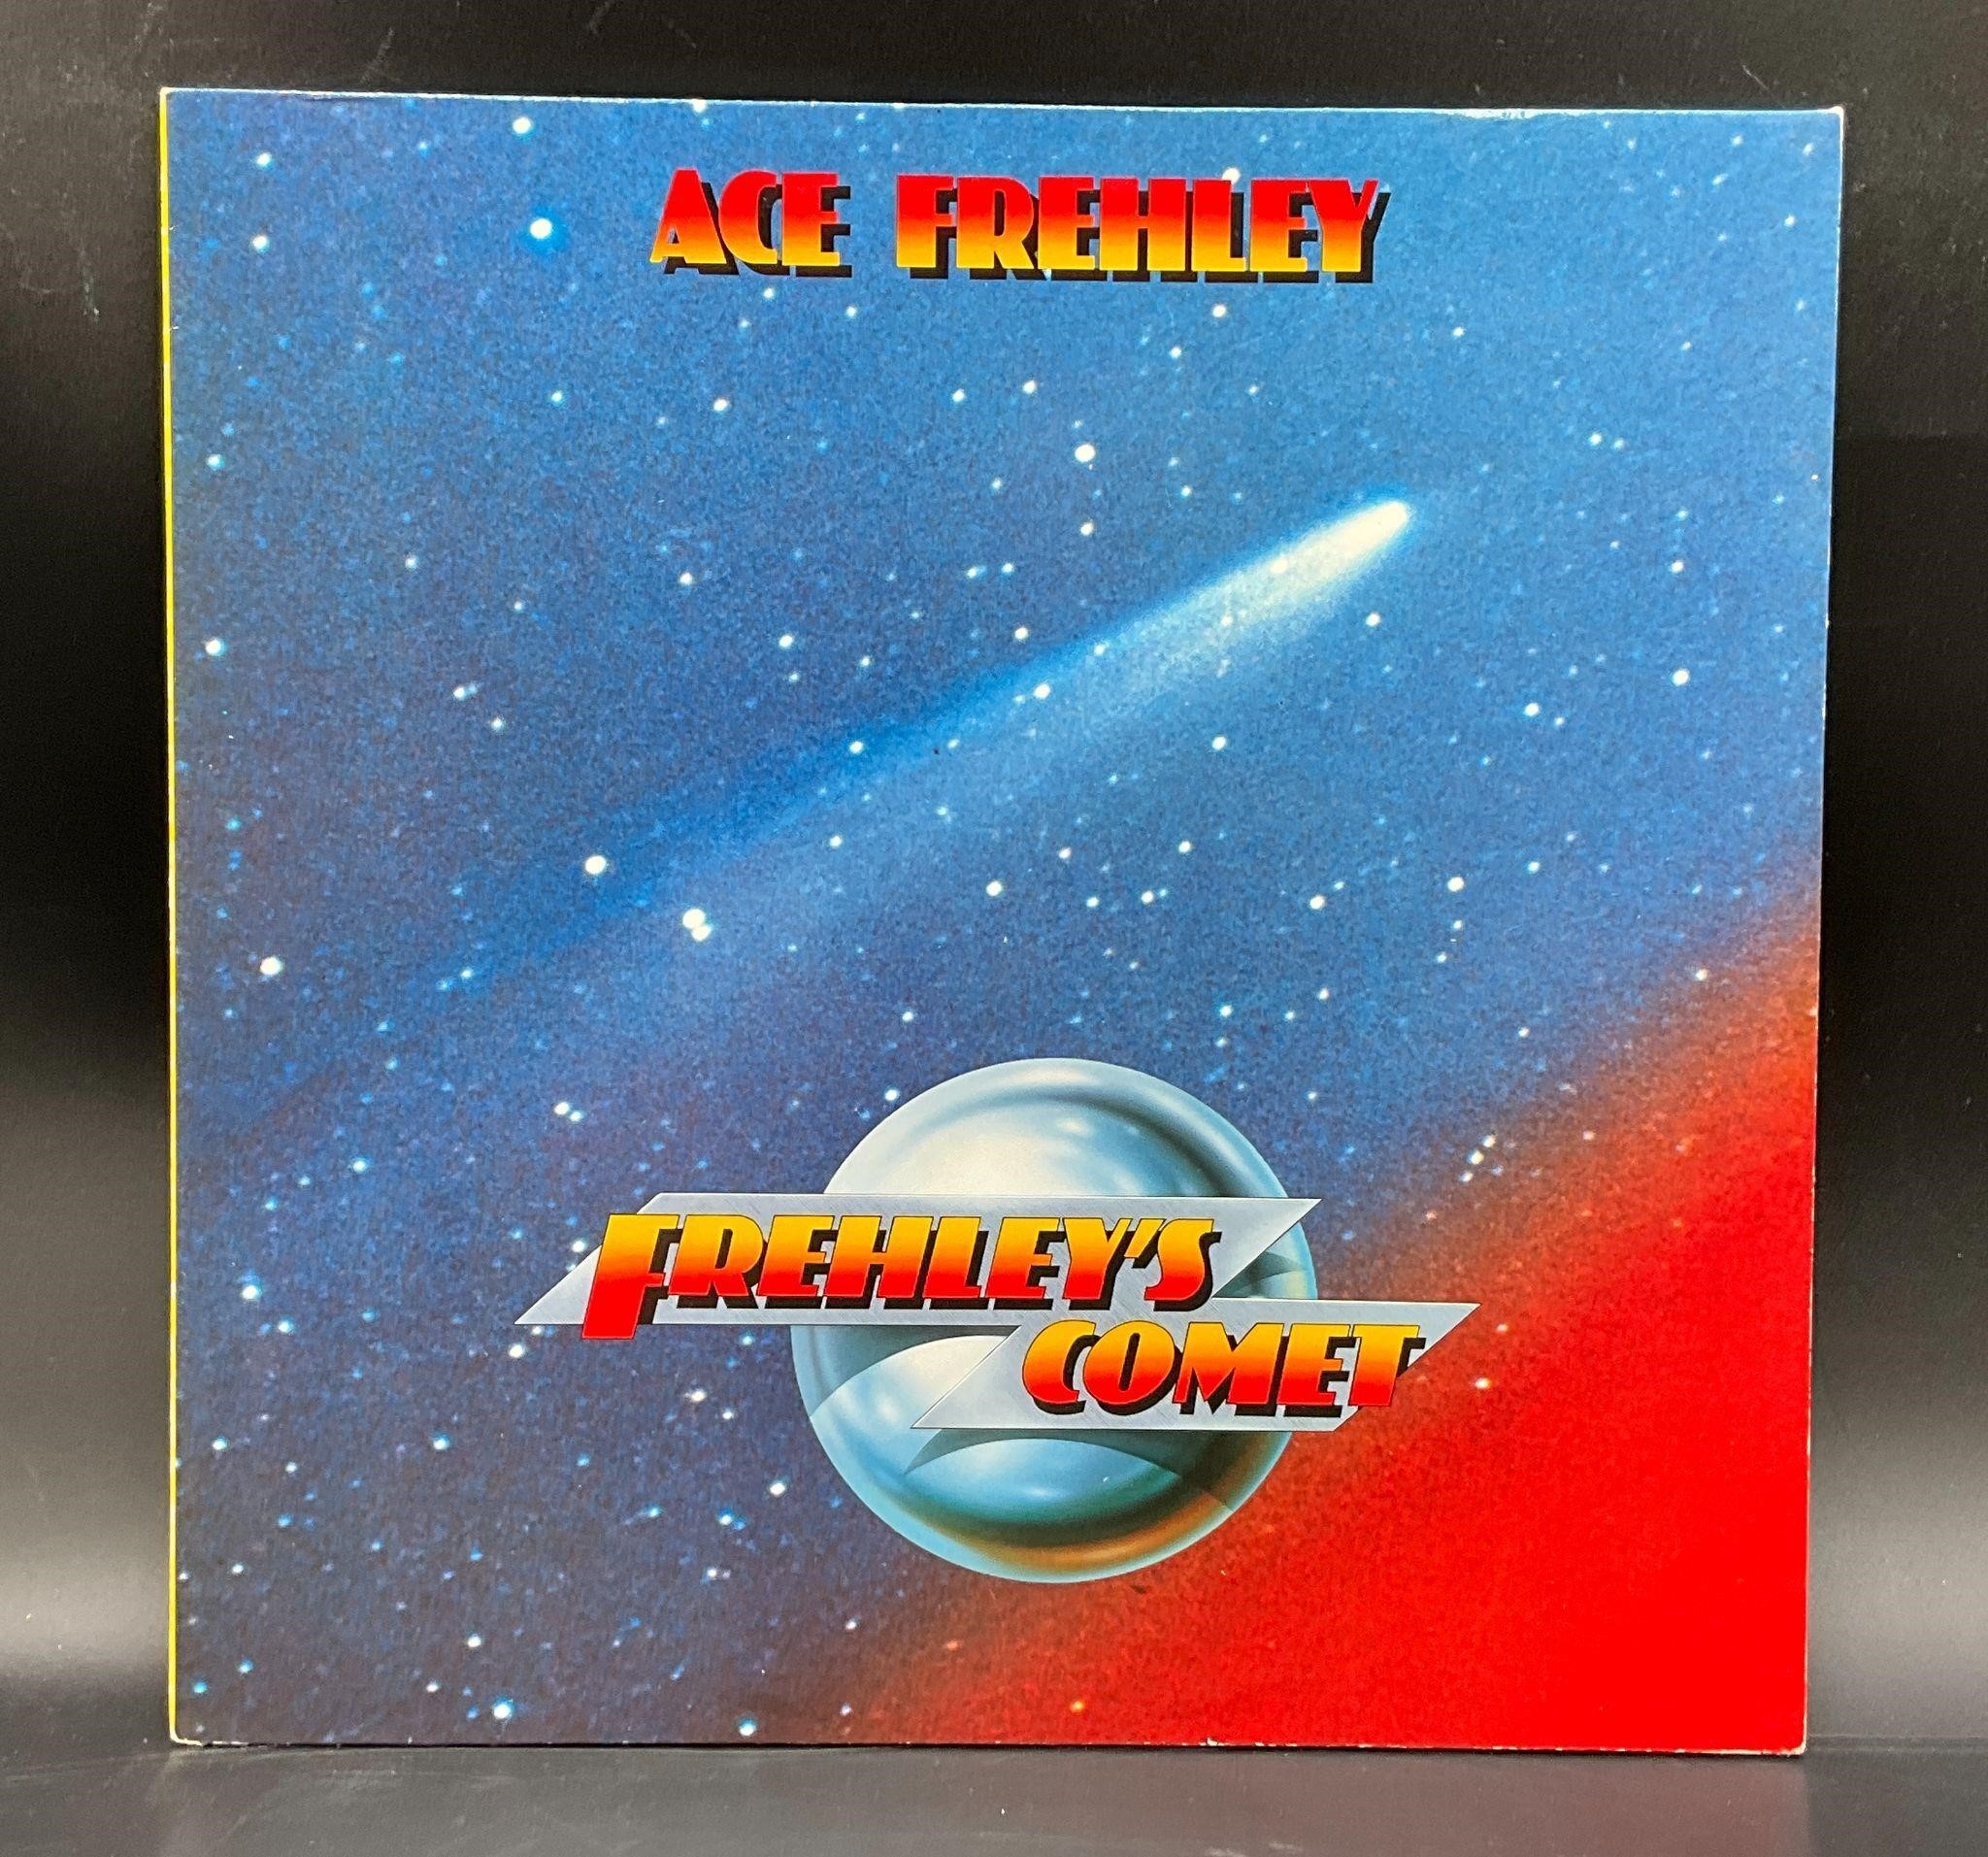 1987 Ace Frehley (KISS) "Frehley's Comet" LP